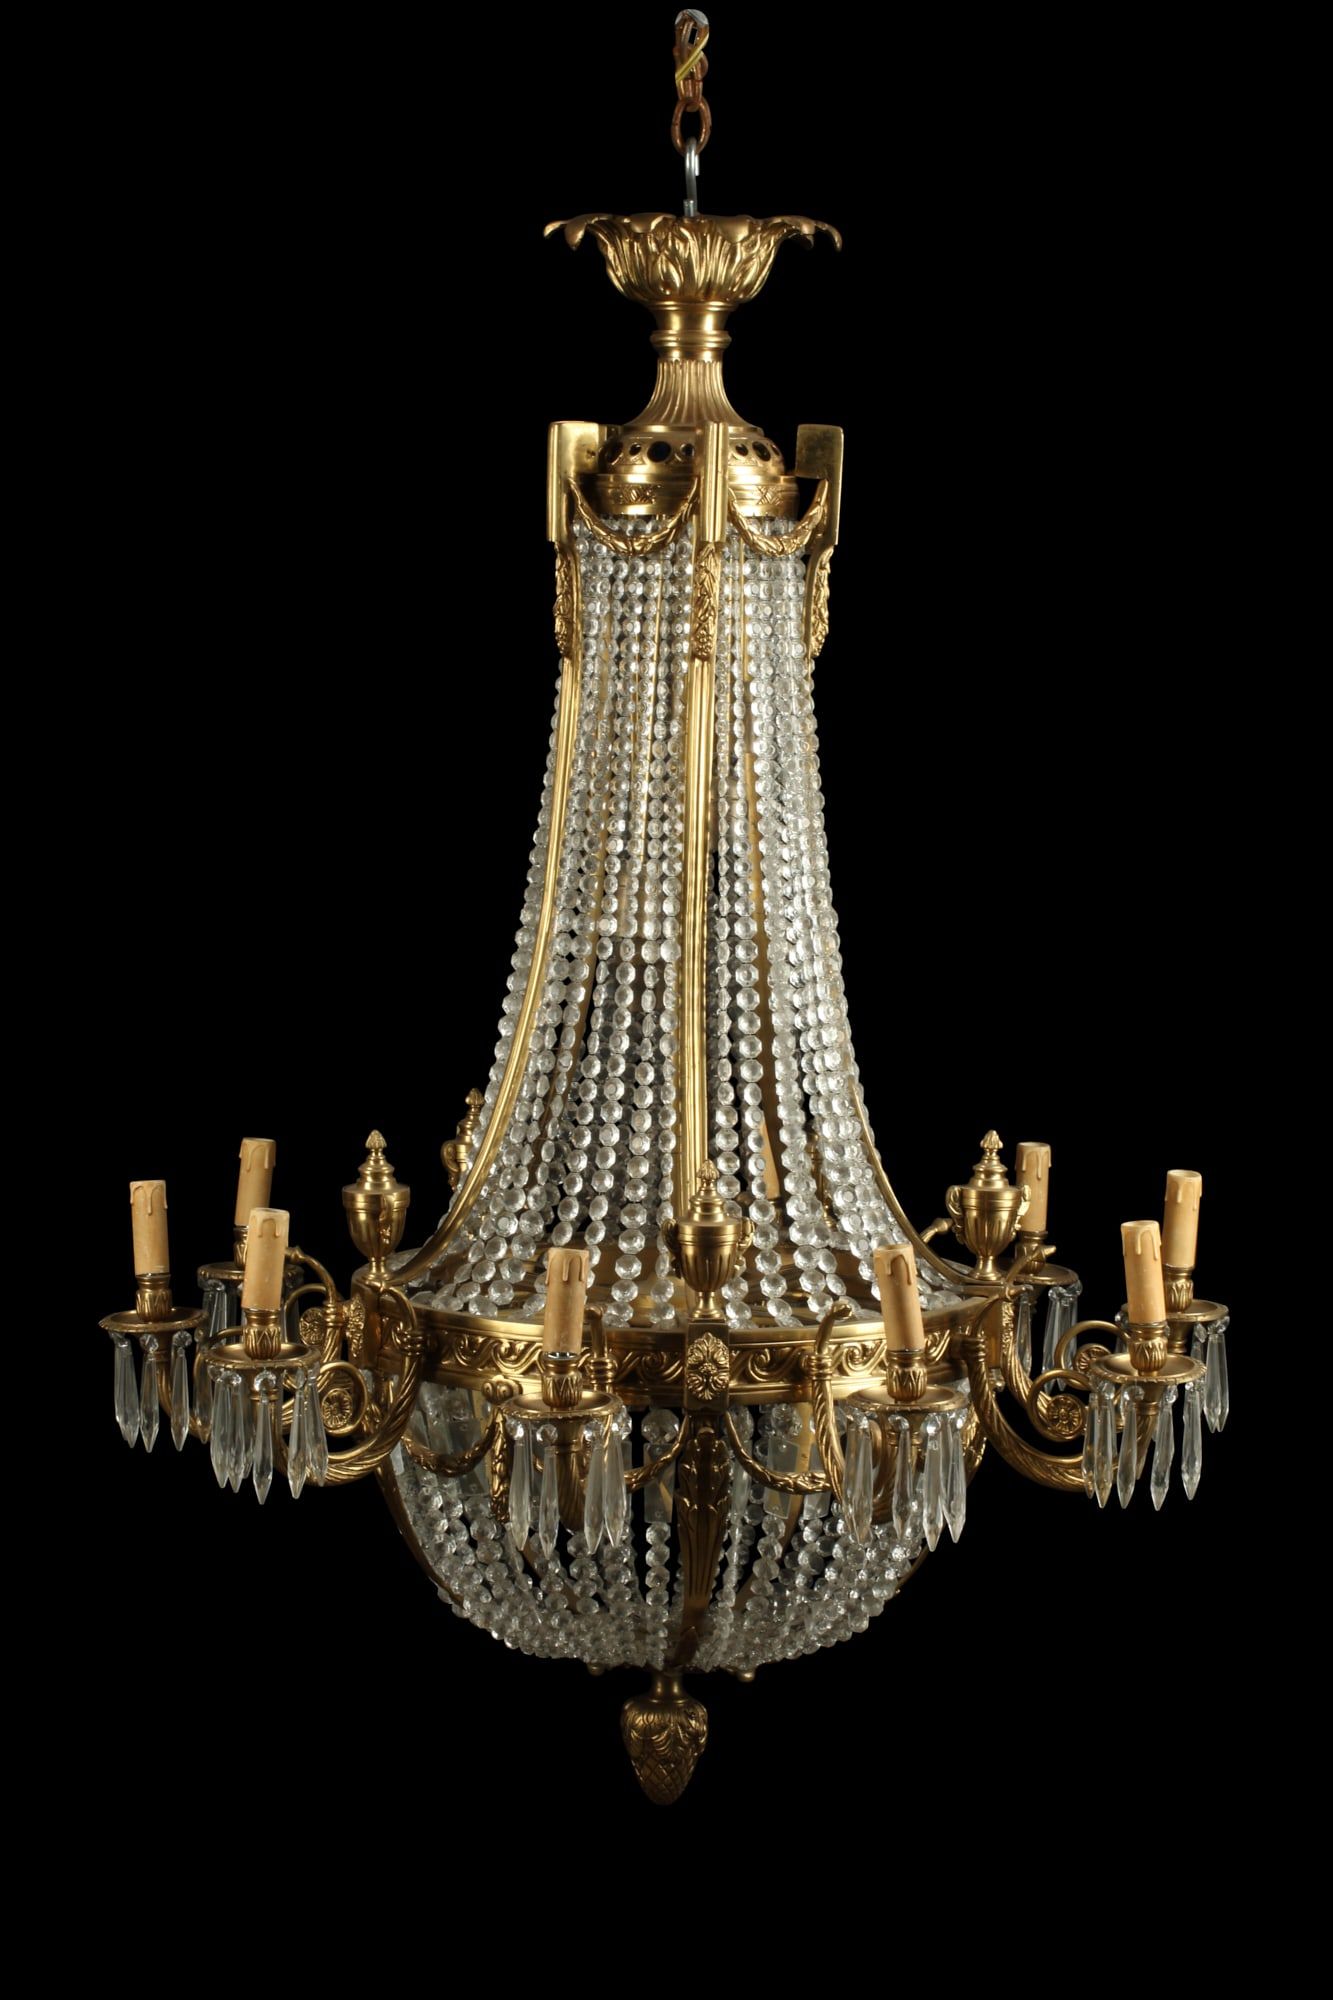 A LOUIS XVI STYLE BRONZE AND GLASS